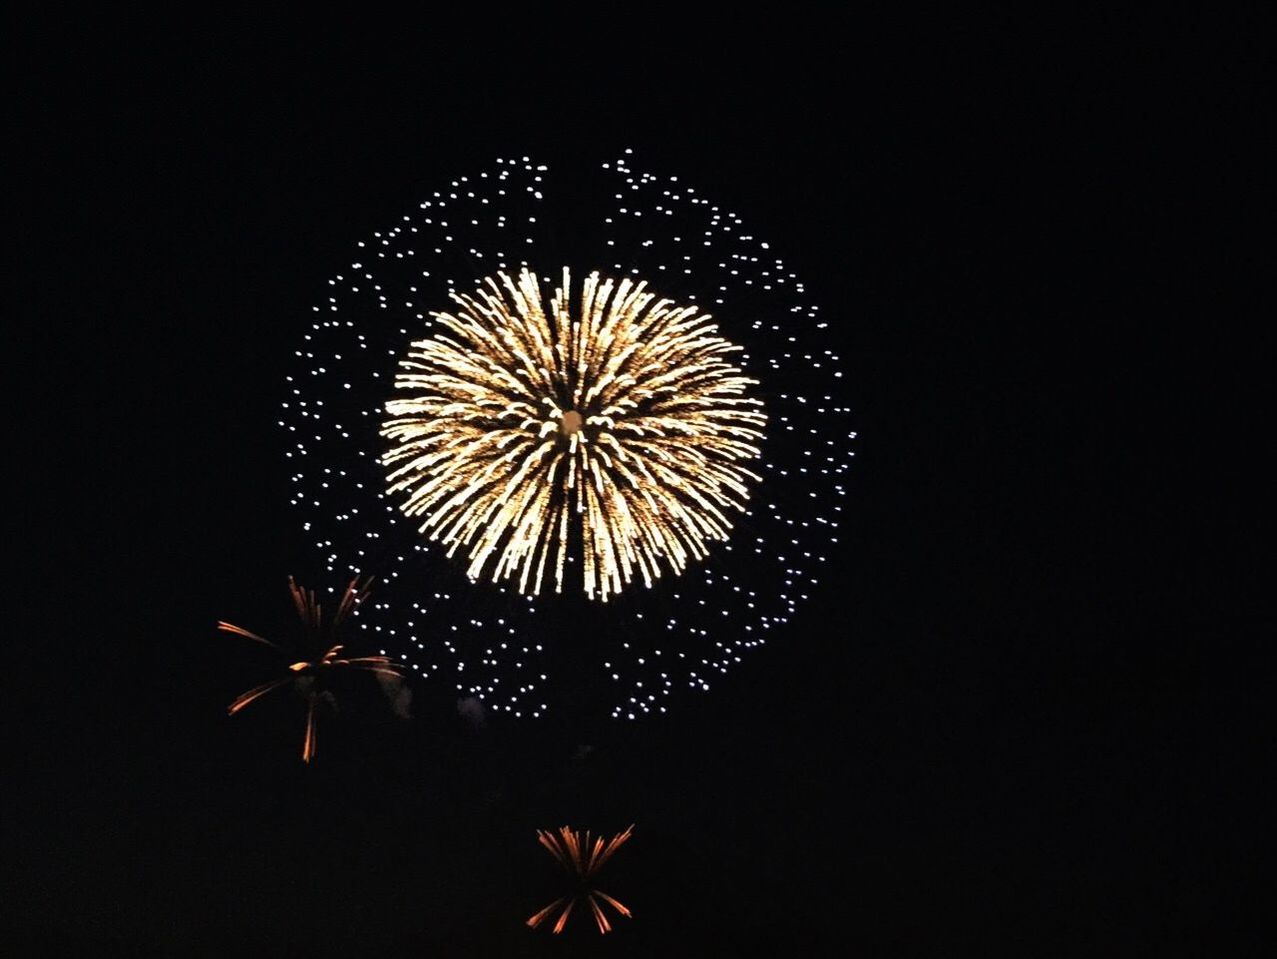 LOW ANGLE VIEW OF FIREWORKS DISPLAY AGAINST SKY AT NIGHT